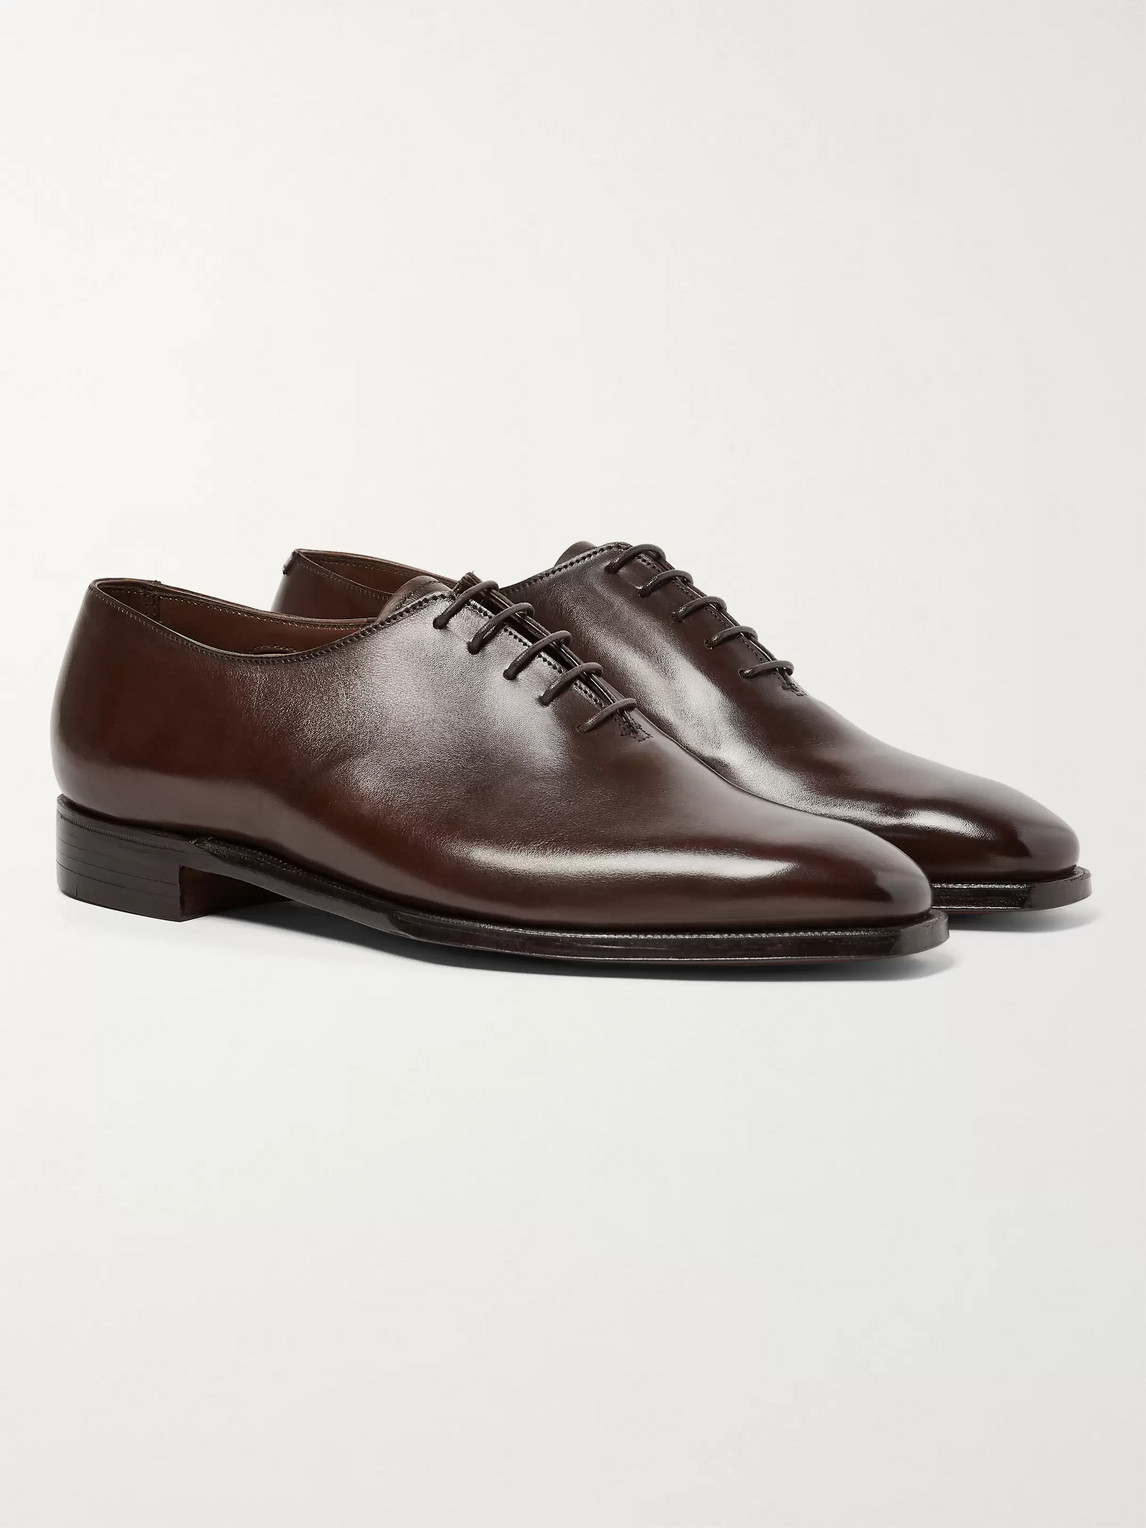 GEORGE CLEVERLEY ALAN 3 WHOLE-CUT LEATHER OXFORD SHOES